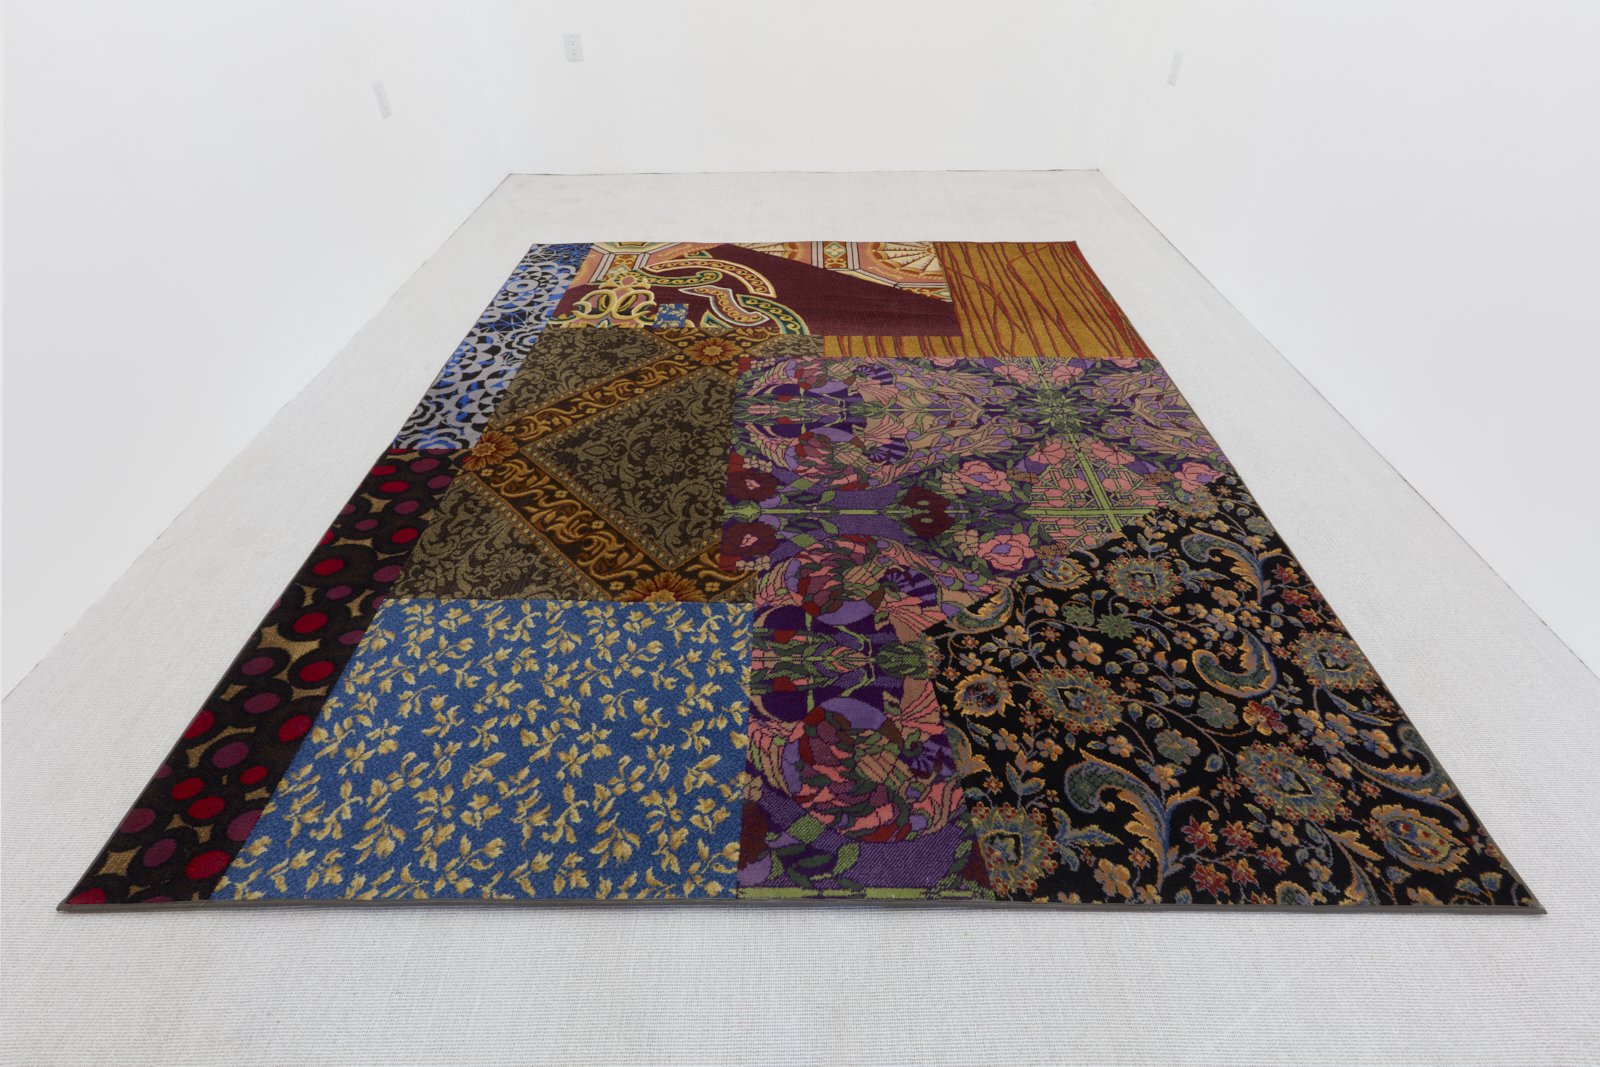  Cayetano Ferrer   Remnant Recomposition 5 (Section B) , 2019-20  Axminster carpet (80% wool, 20% nylon)  118 x 97 in (300 x 246 cm)   